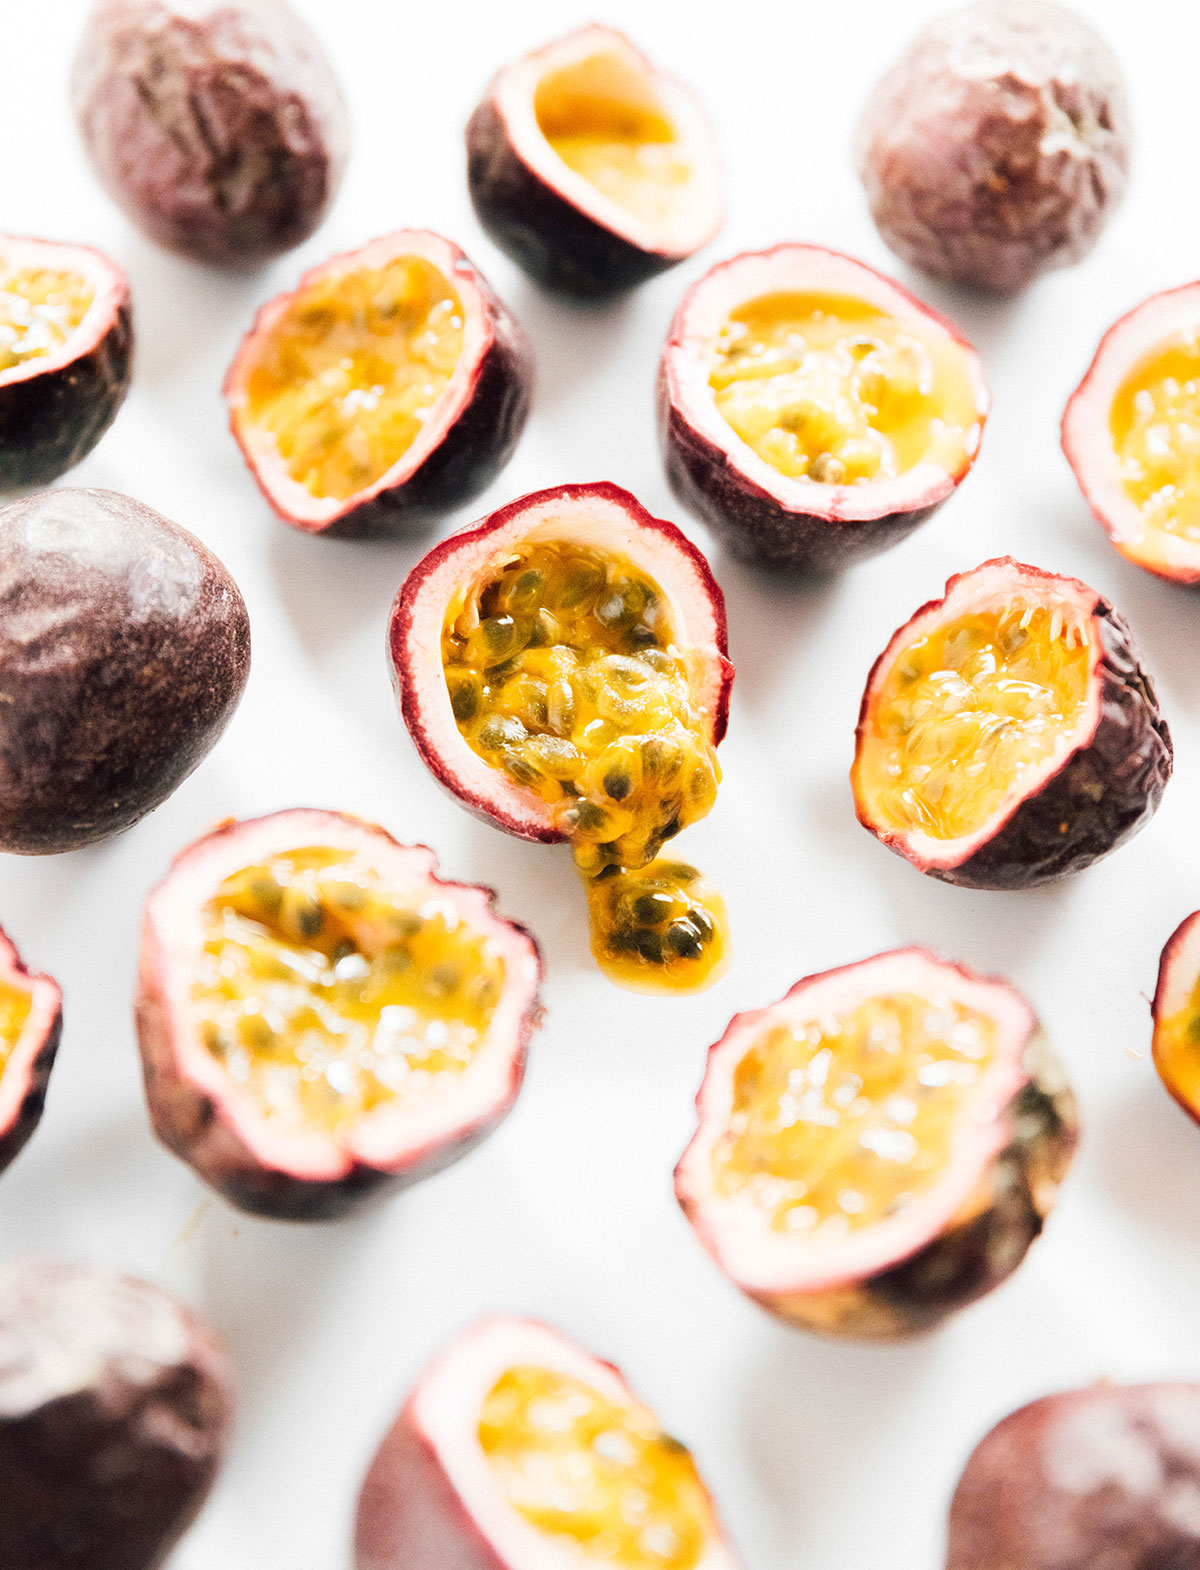 Passion fruits on a white background.